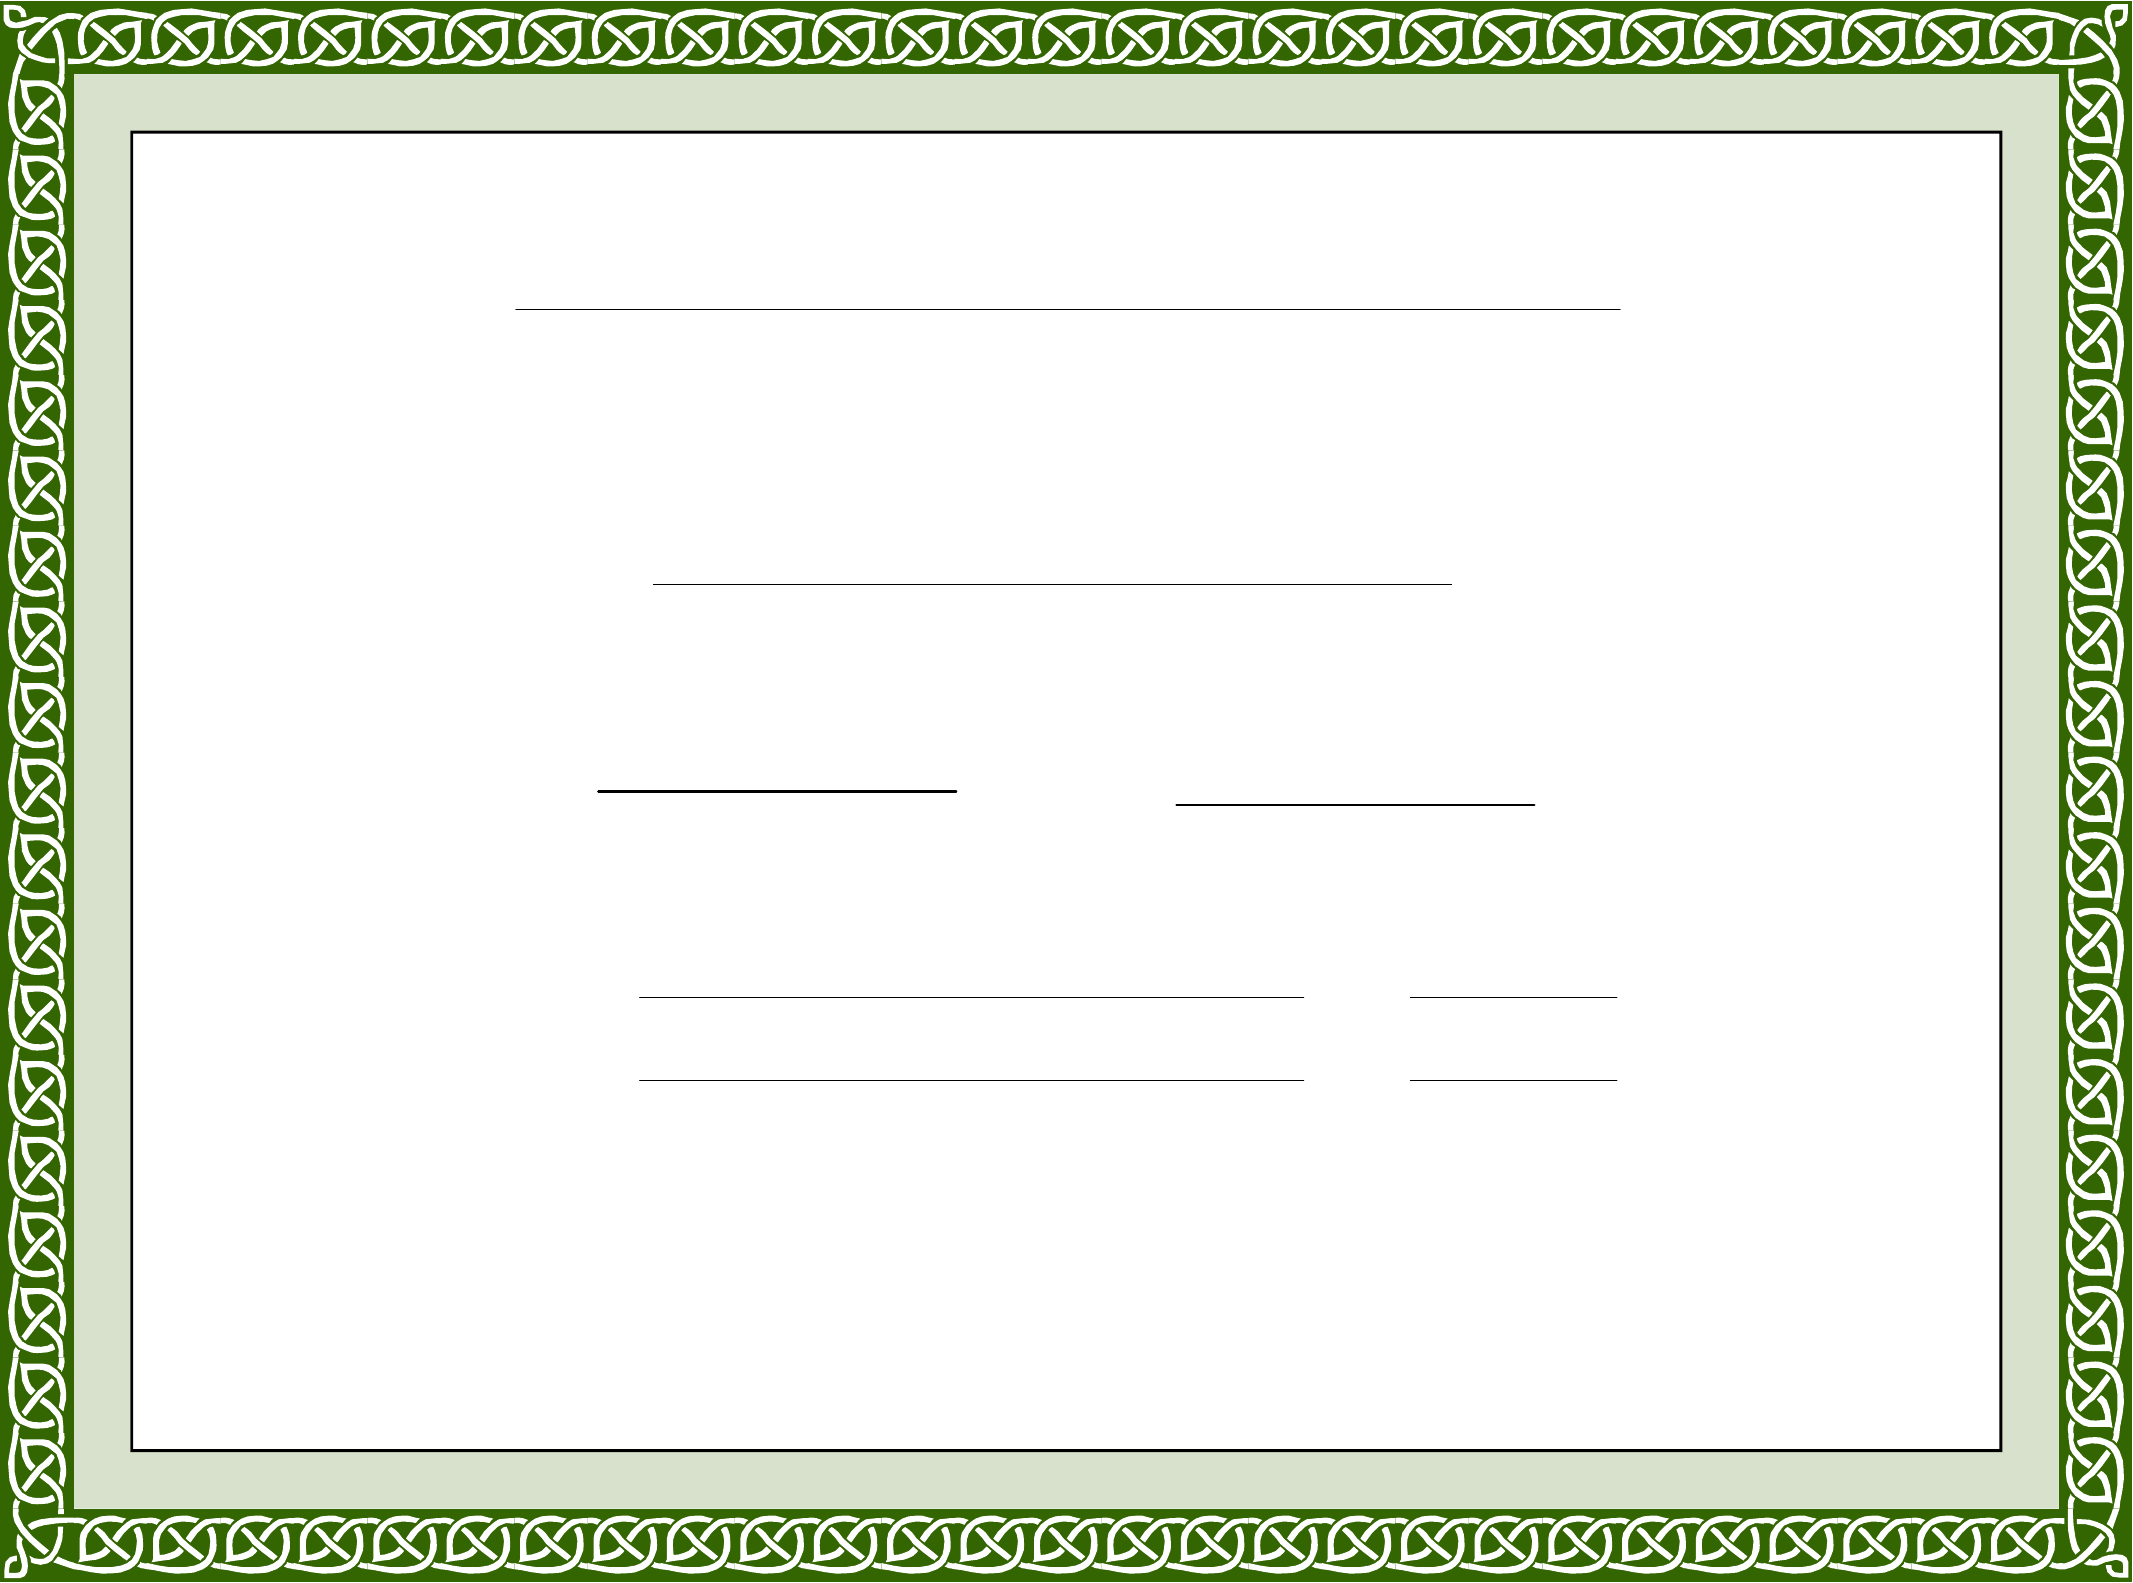 Sample Training Completion Certificate Template Free Download Regarding Blank Certificate Templates Free Download